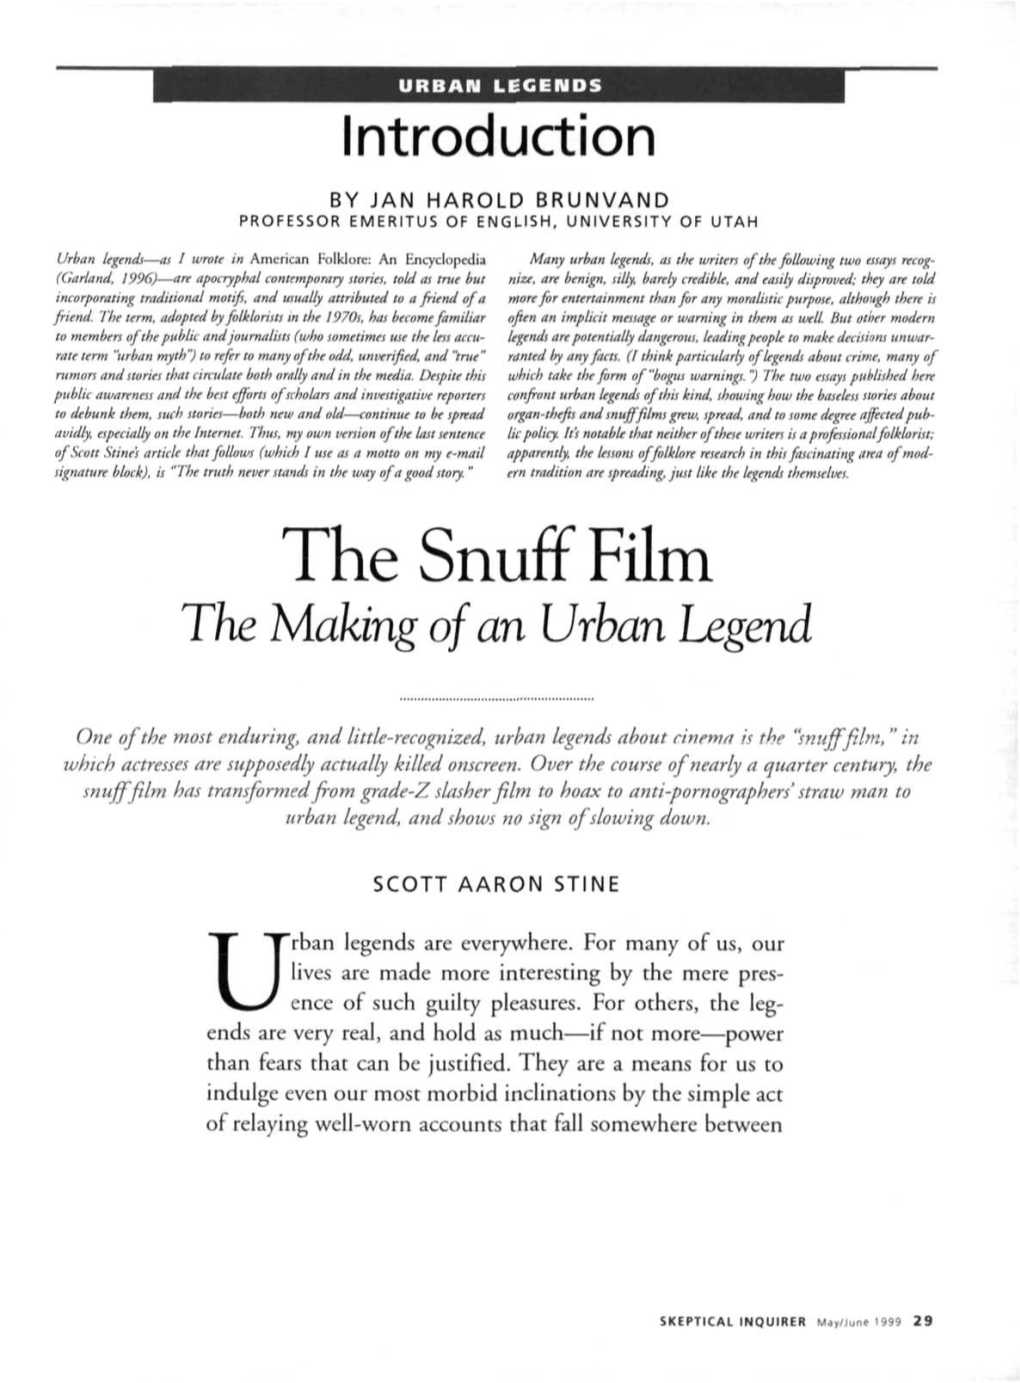 The Snuff Film the Making of an Urban Legend